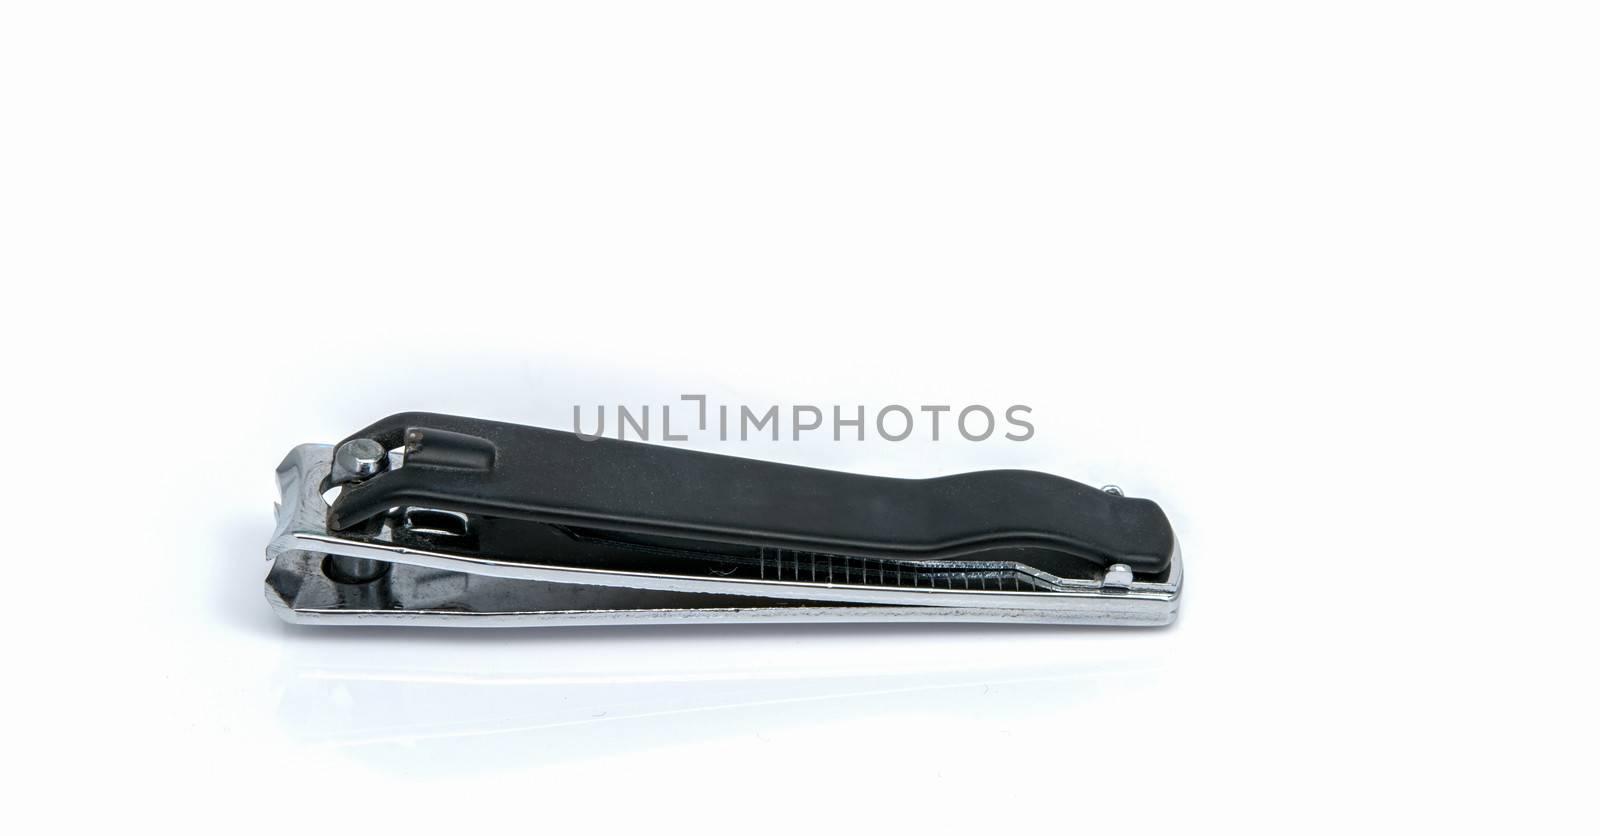 Black Nail clippers isolated on white background